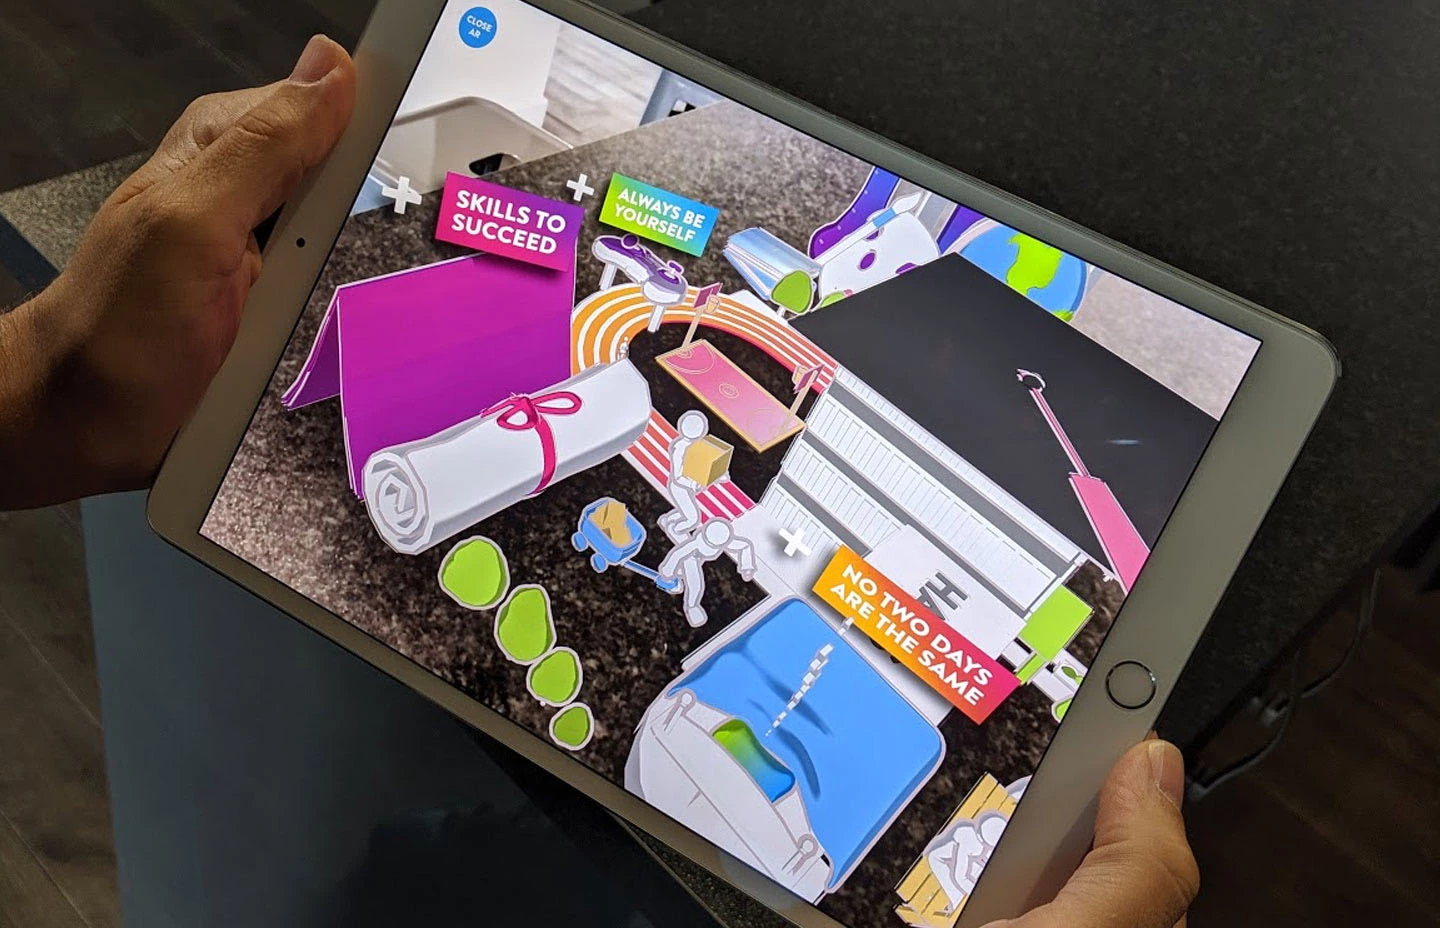 An ipad using the AR camera to view a University experience